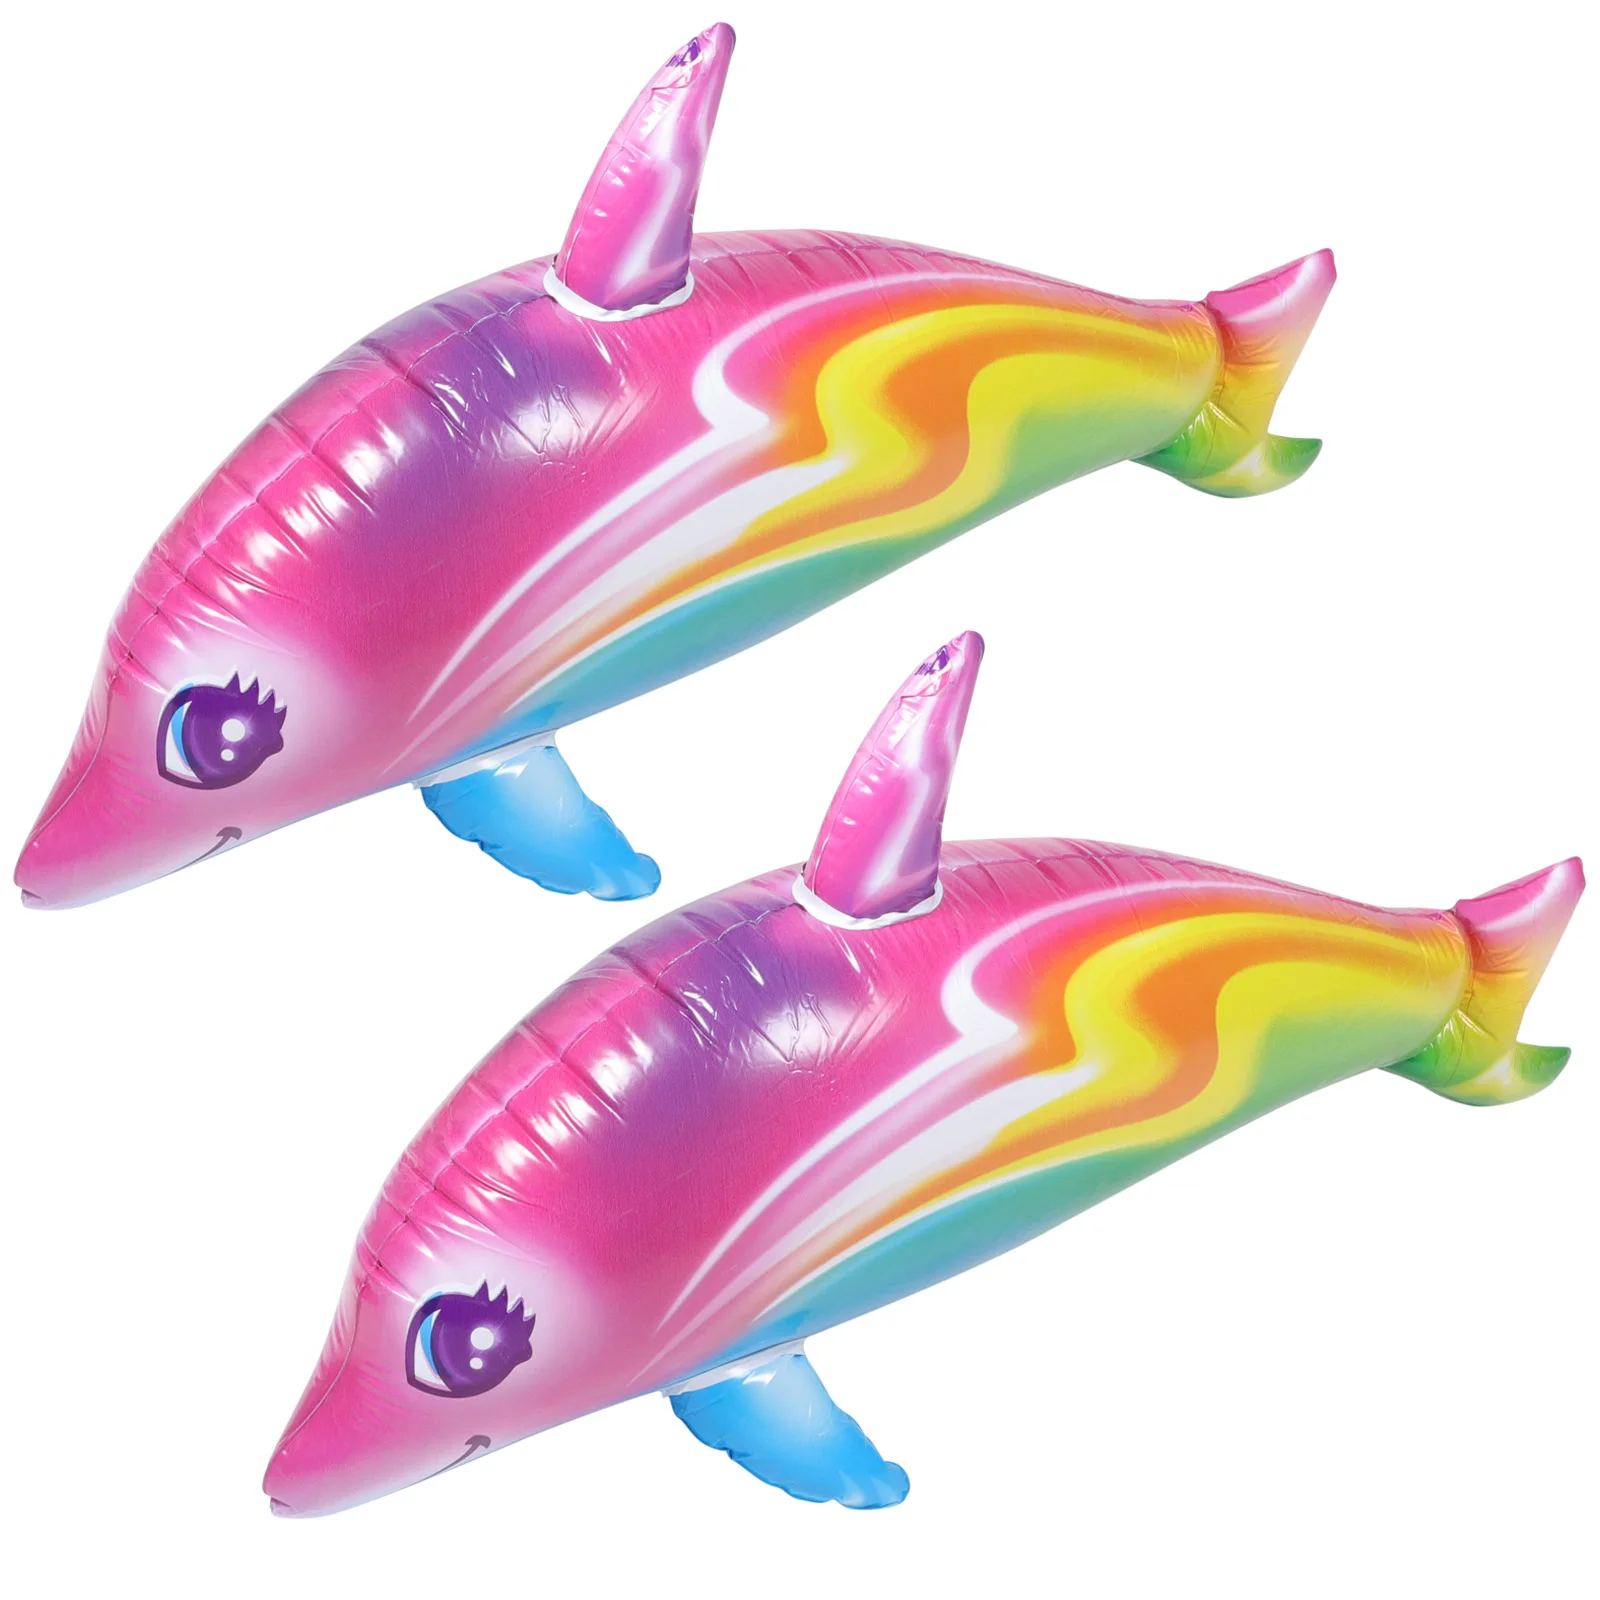 

2 Pcs Inflatable Dolphin Toy Learning Beach Pool Party Mermaid Toys Favors Children Kids Educational